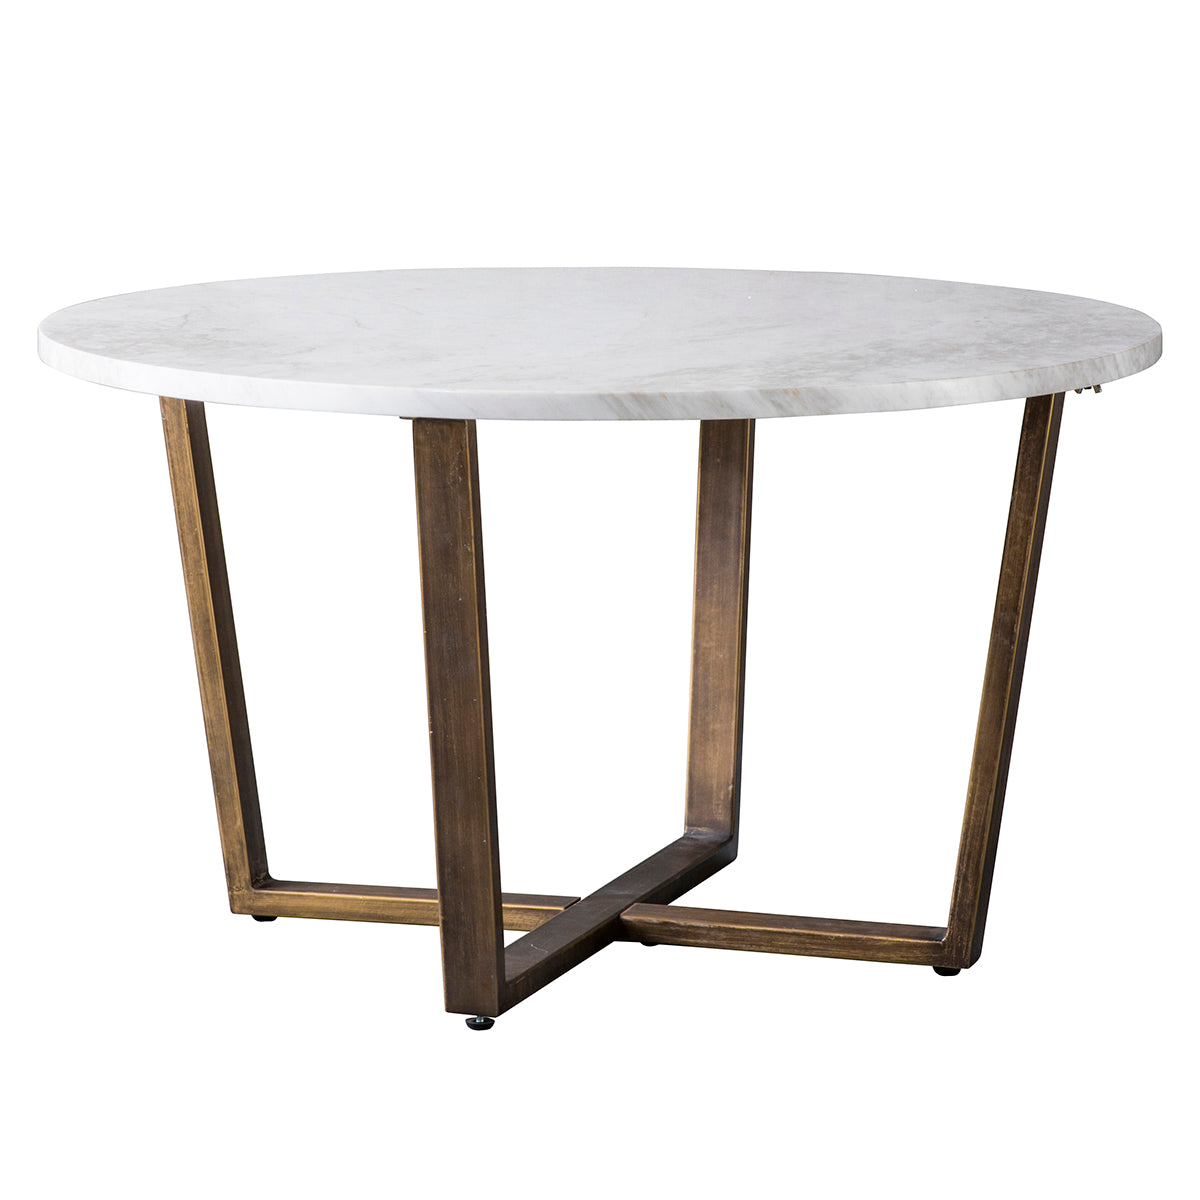 A Hallsand Round Coffee Table Marble 800x800x450mm with brass legs for interior decor.